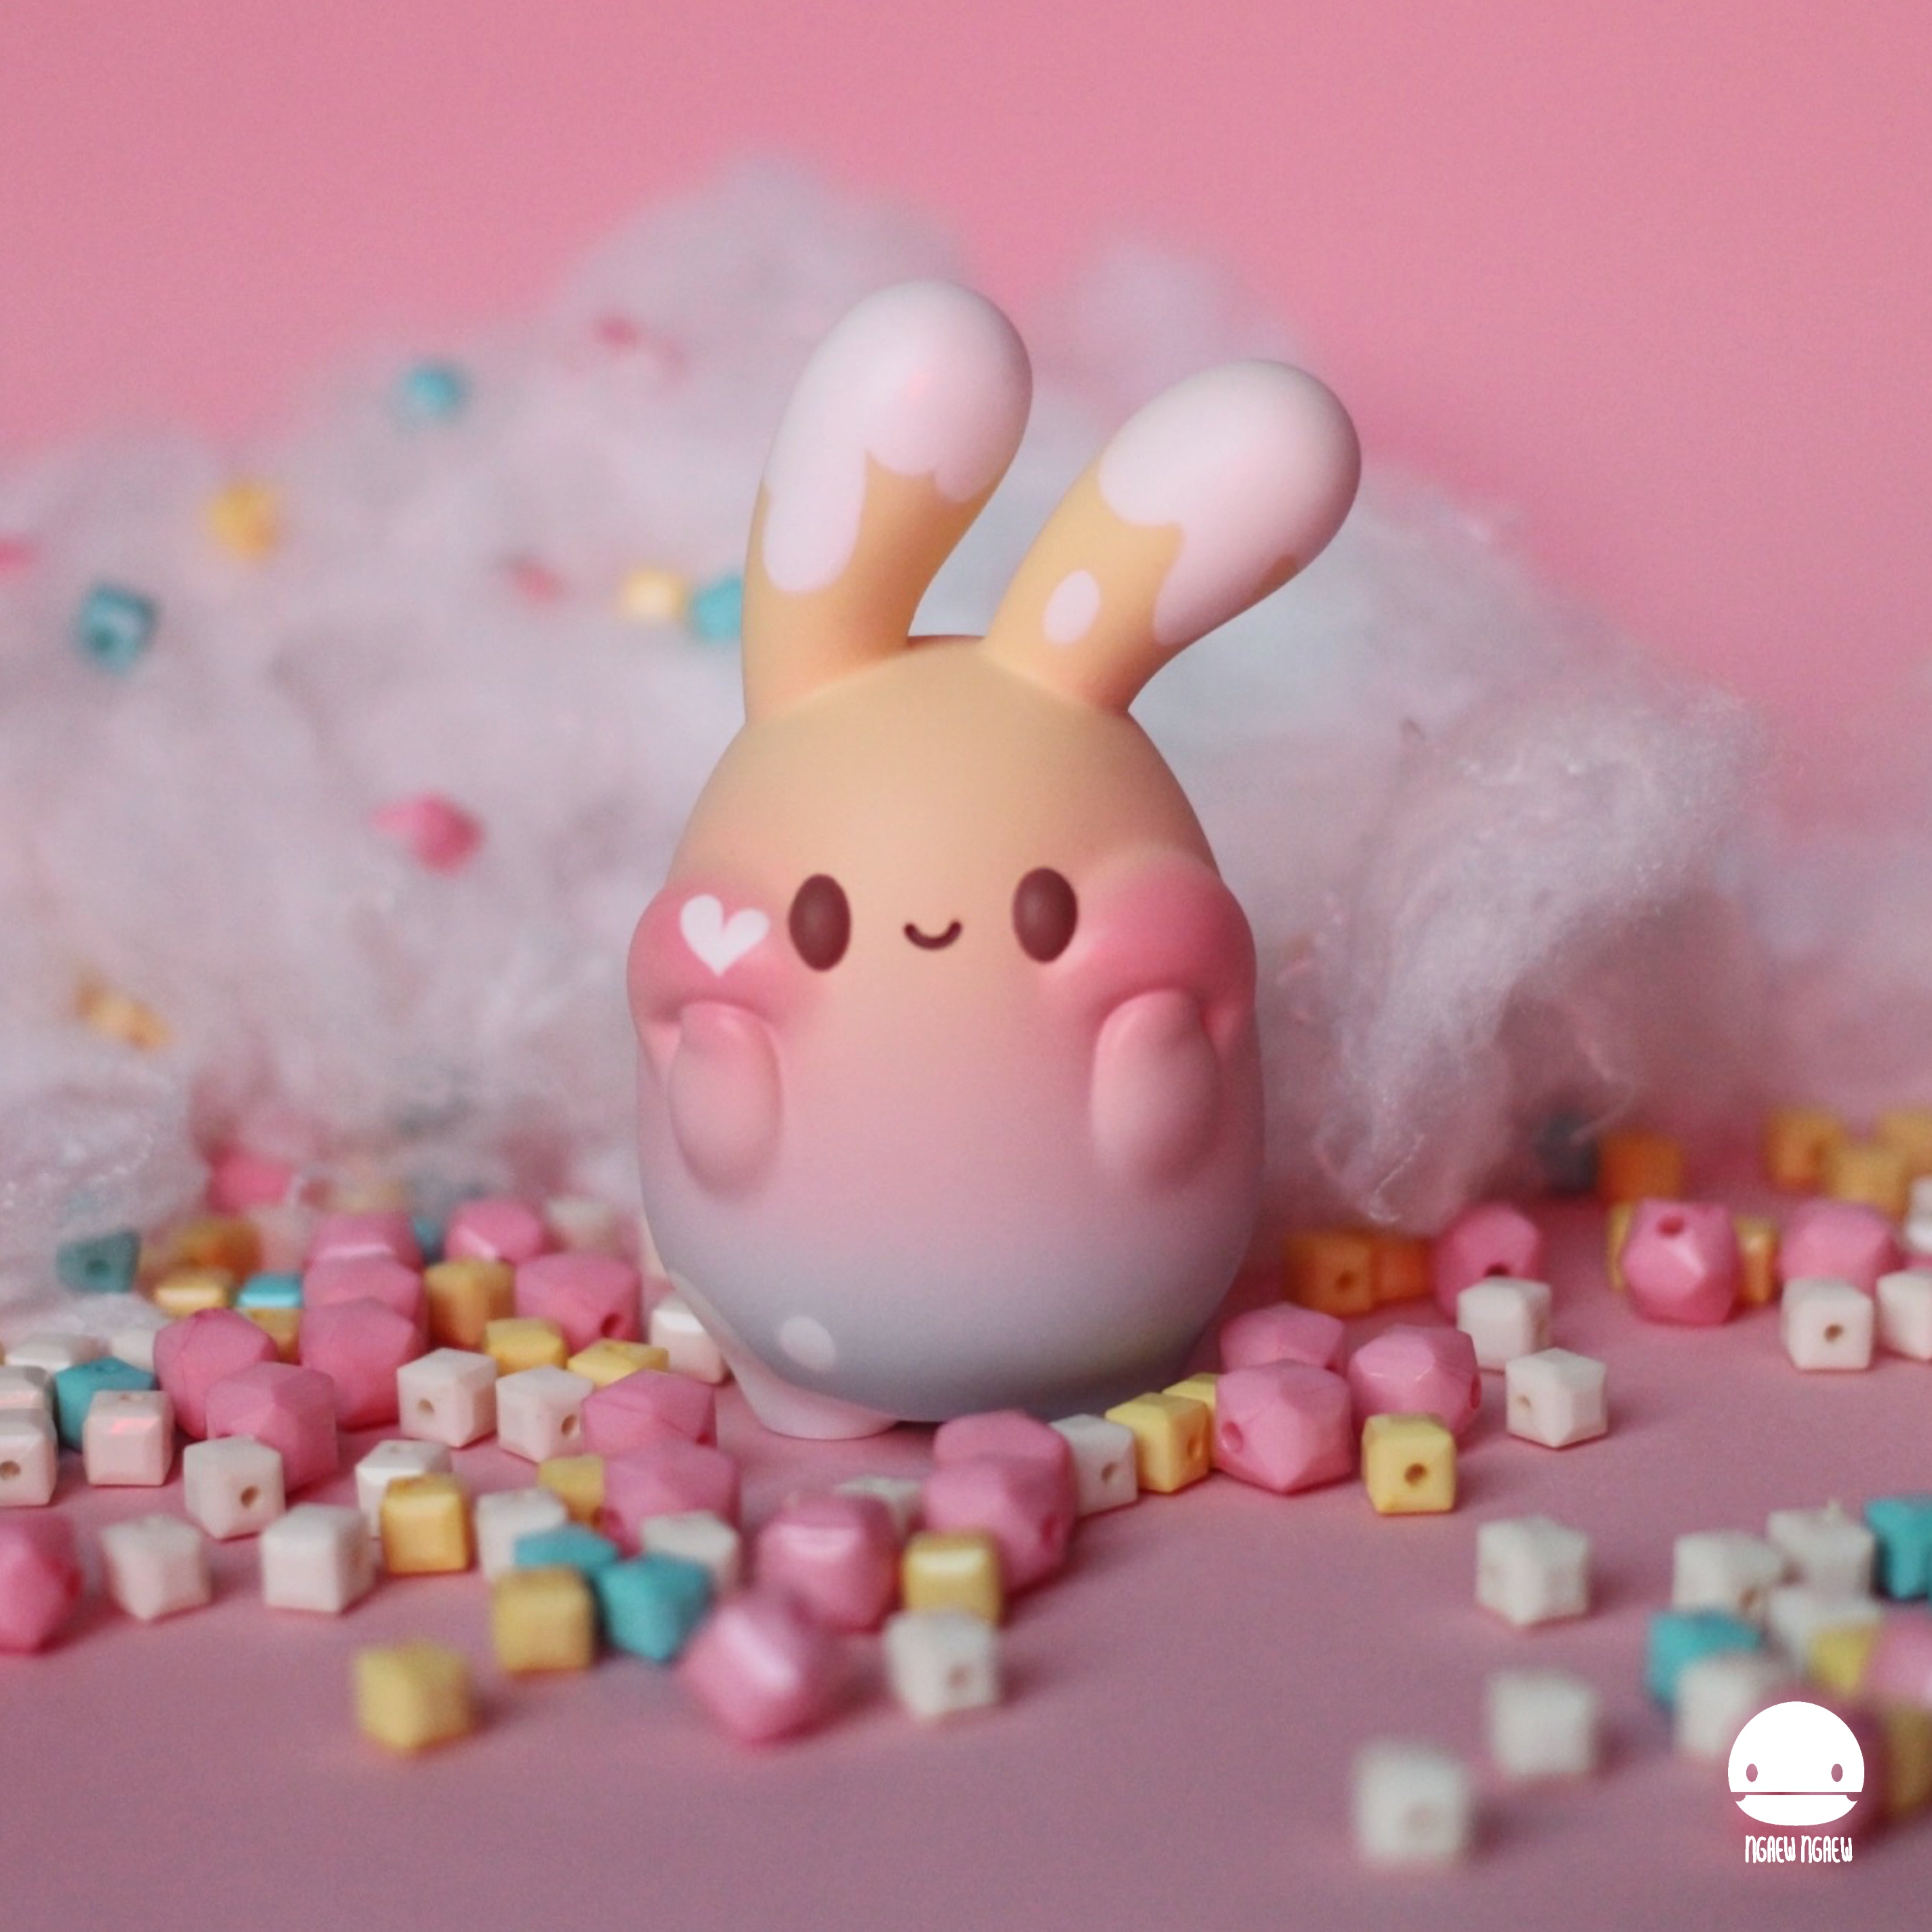 Toy bunny on beads, close-up of toy, cube, and pig. Limited edition Ngaew Ngaew Choco Rainbow, 8 cm resin figure.